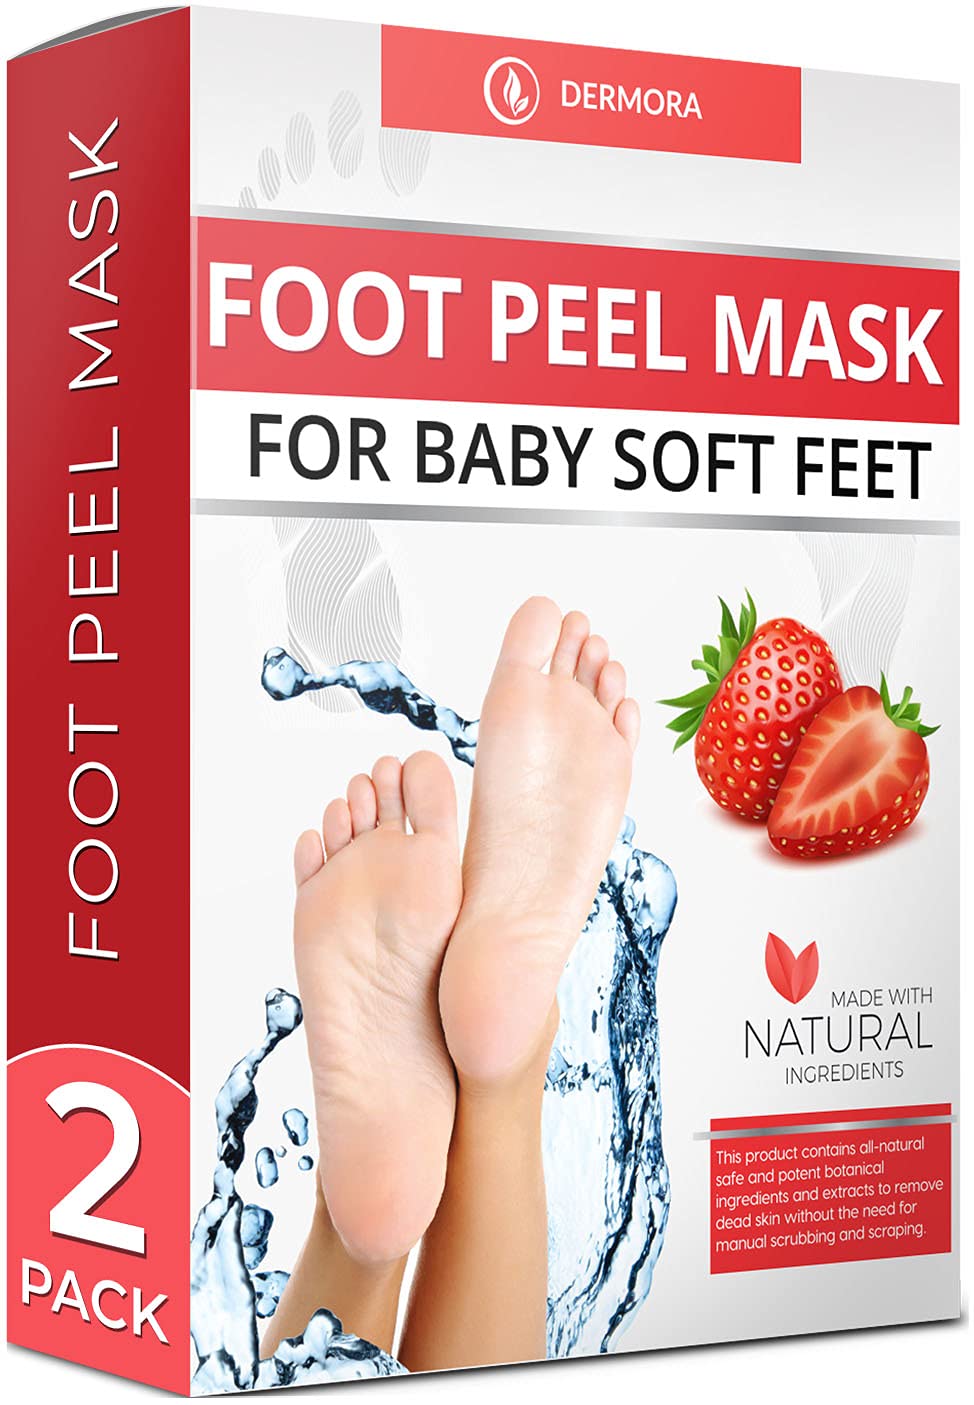 [Australia] - Foot Peel Mask - 2 Pack - For Cracked Heels, Dead Skin and Calluses - Make Your Feet Baby Soft Smooth Silky Skin - Removes Rough Heels, Dry Toe Skin Natural Treatment. (Strawberry Scent) 2 Pairs 